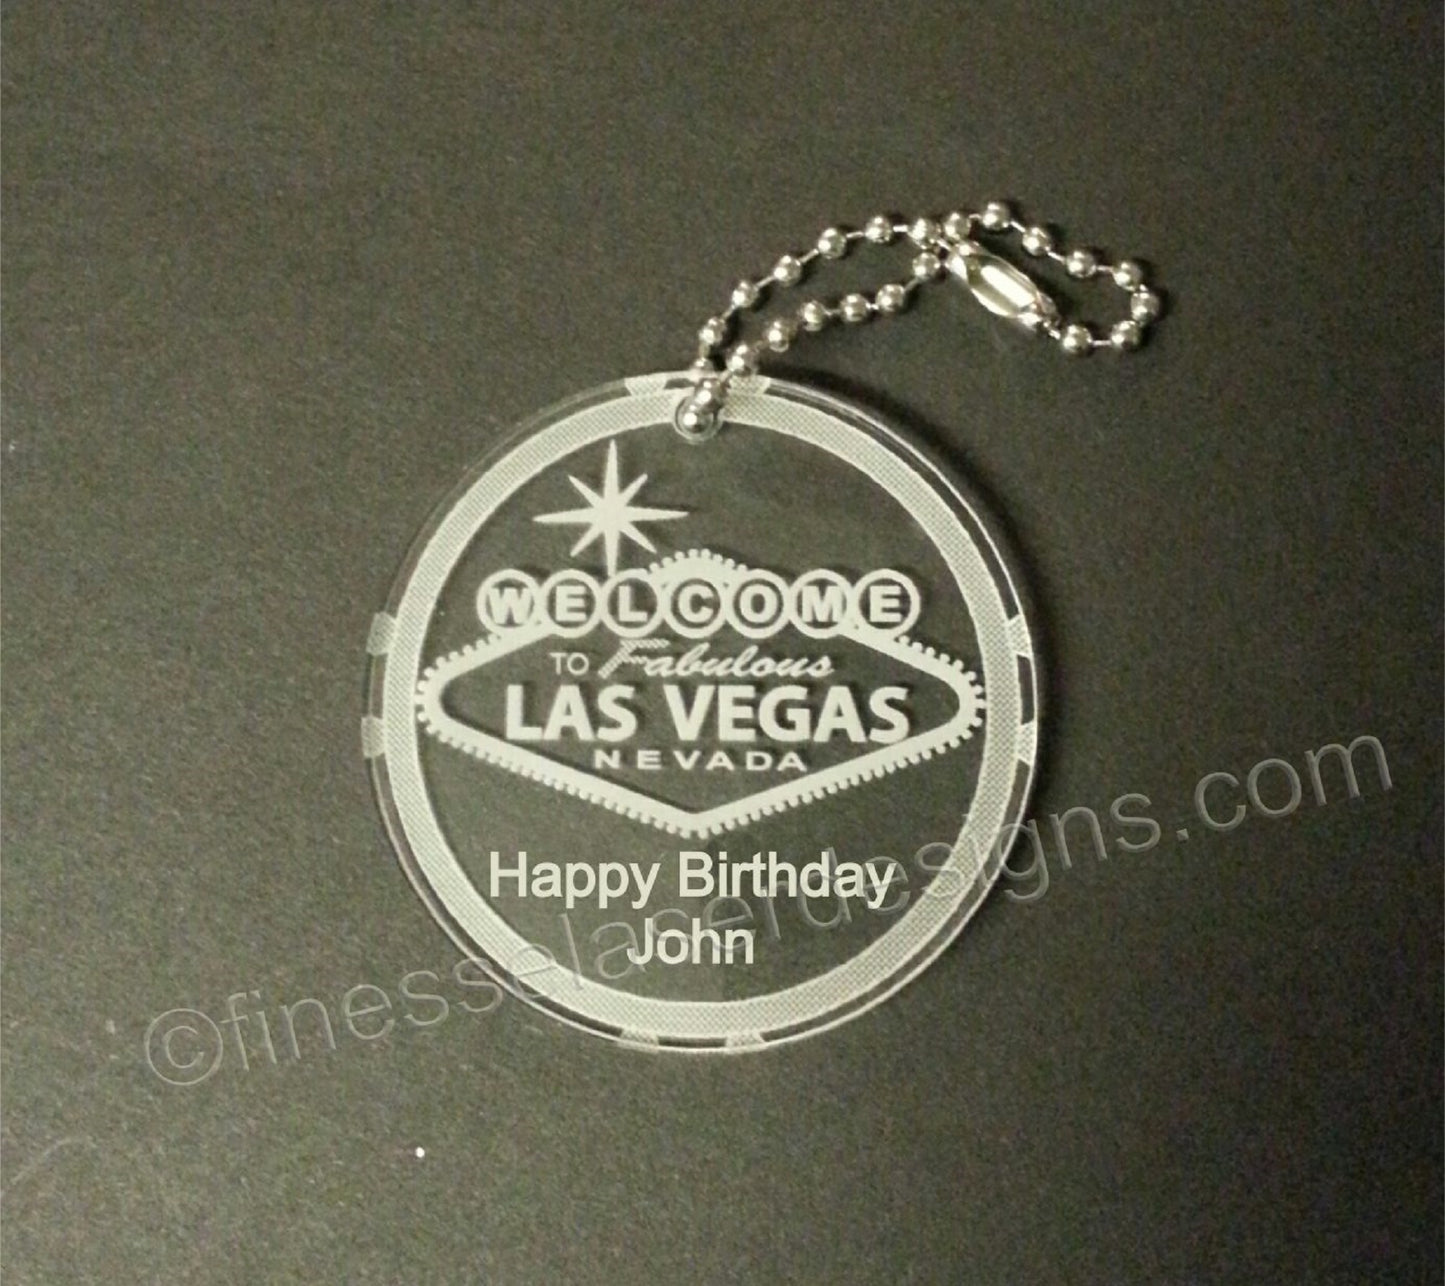 Round Welcome to Las Vegas keychain with Happy Birthday and name